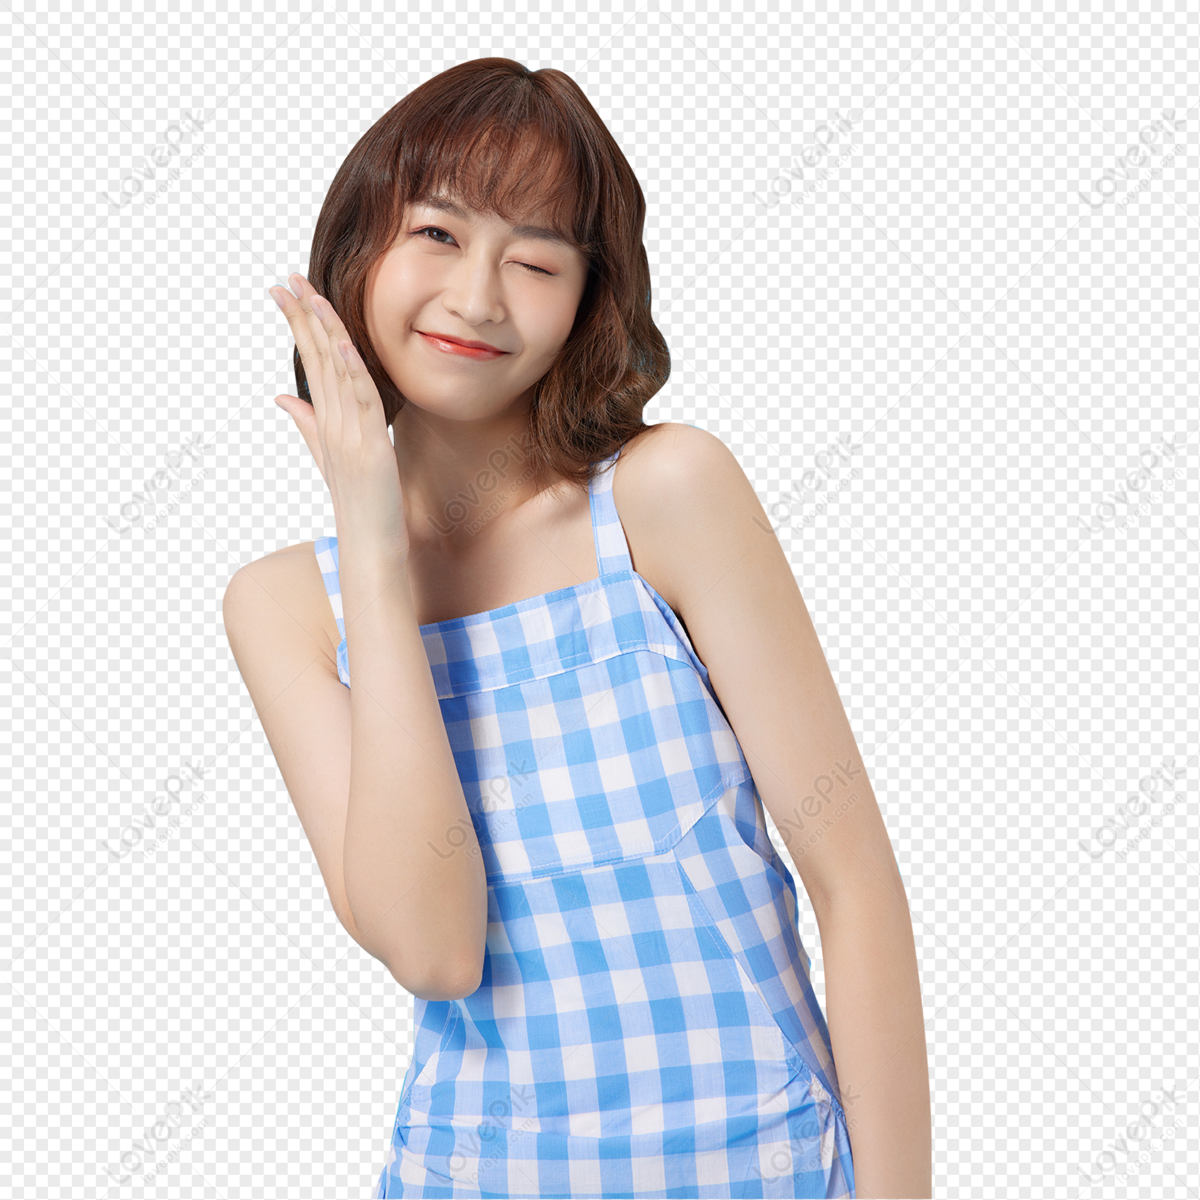 Young Energetic And Lovely Beauty PNG Transparent Background And ...